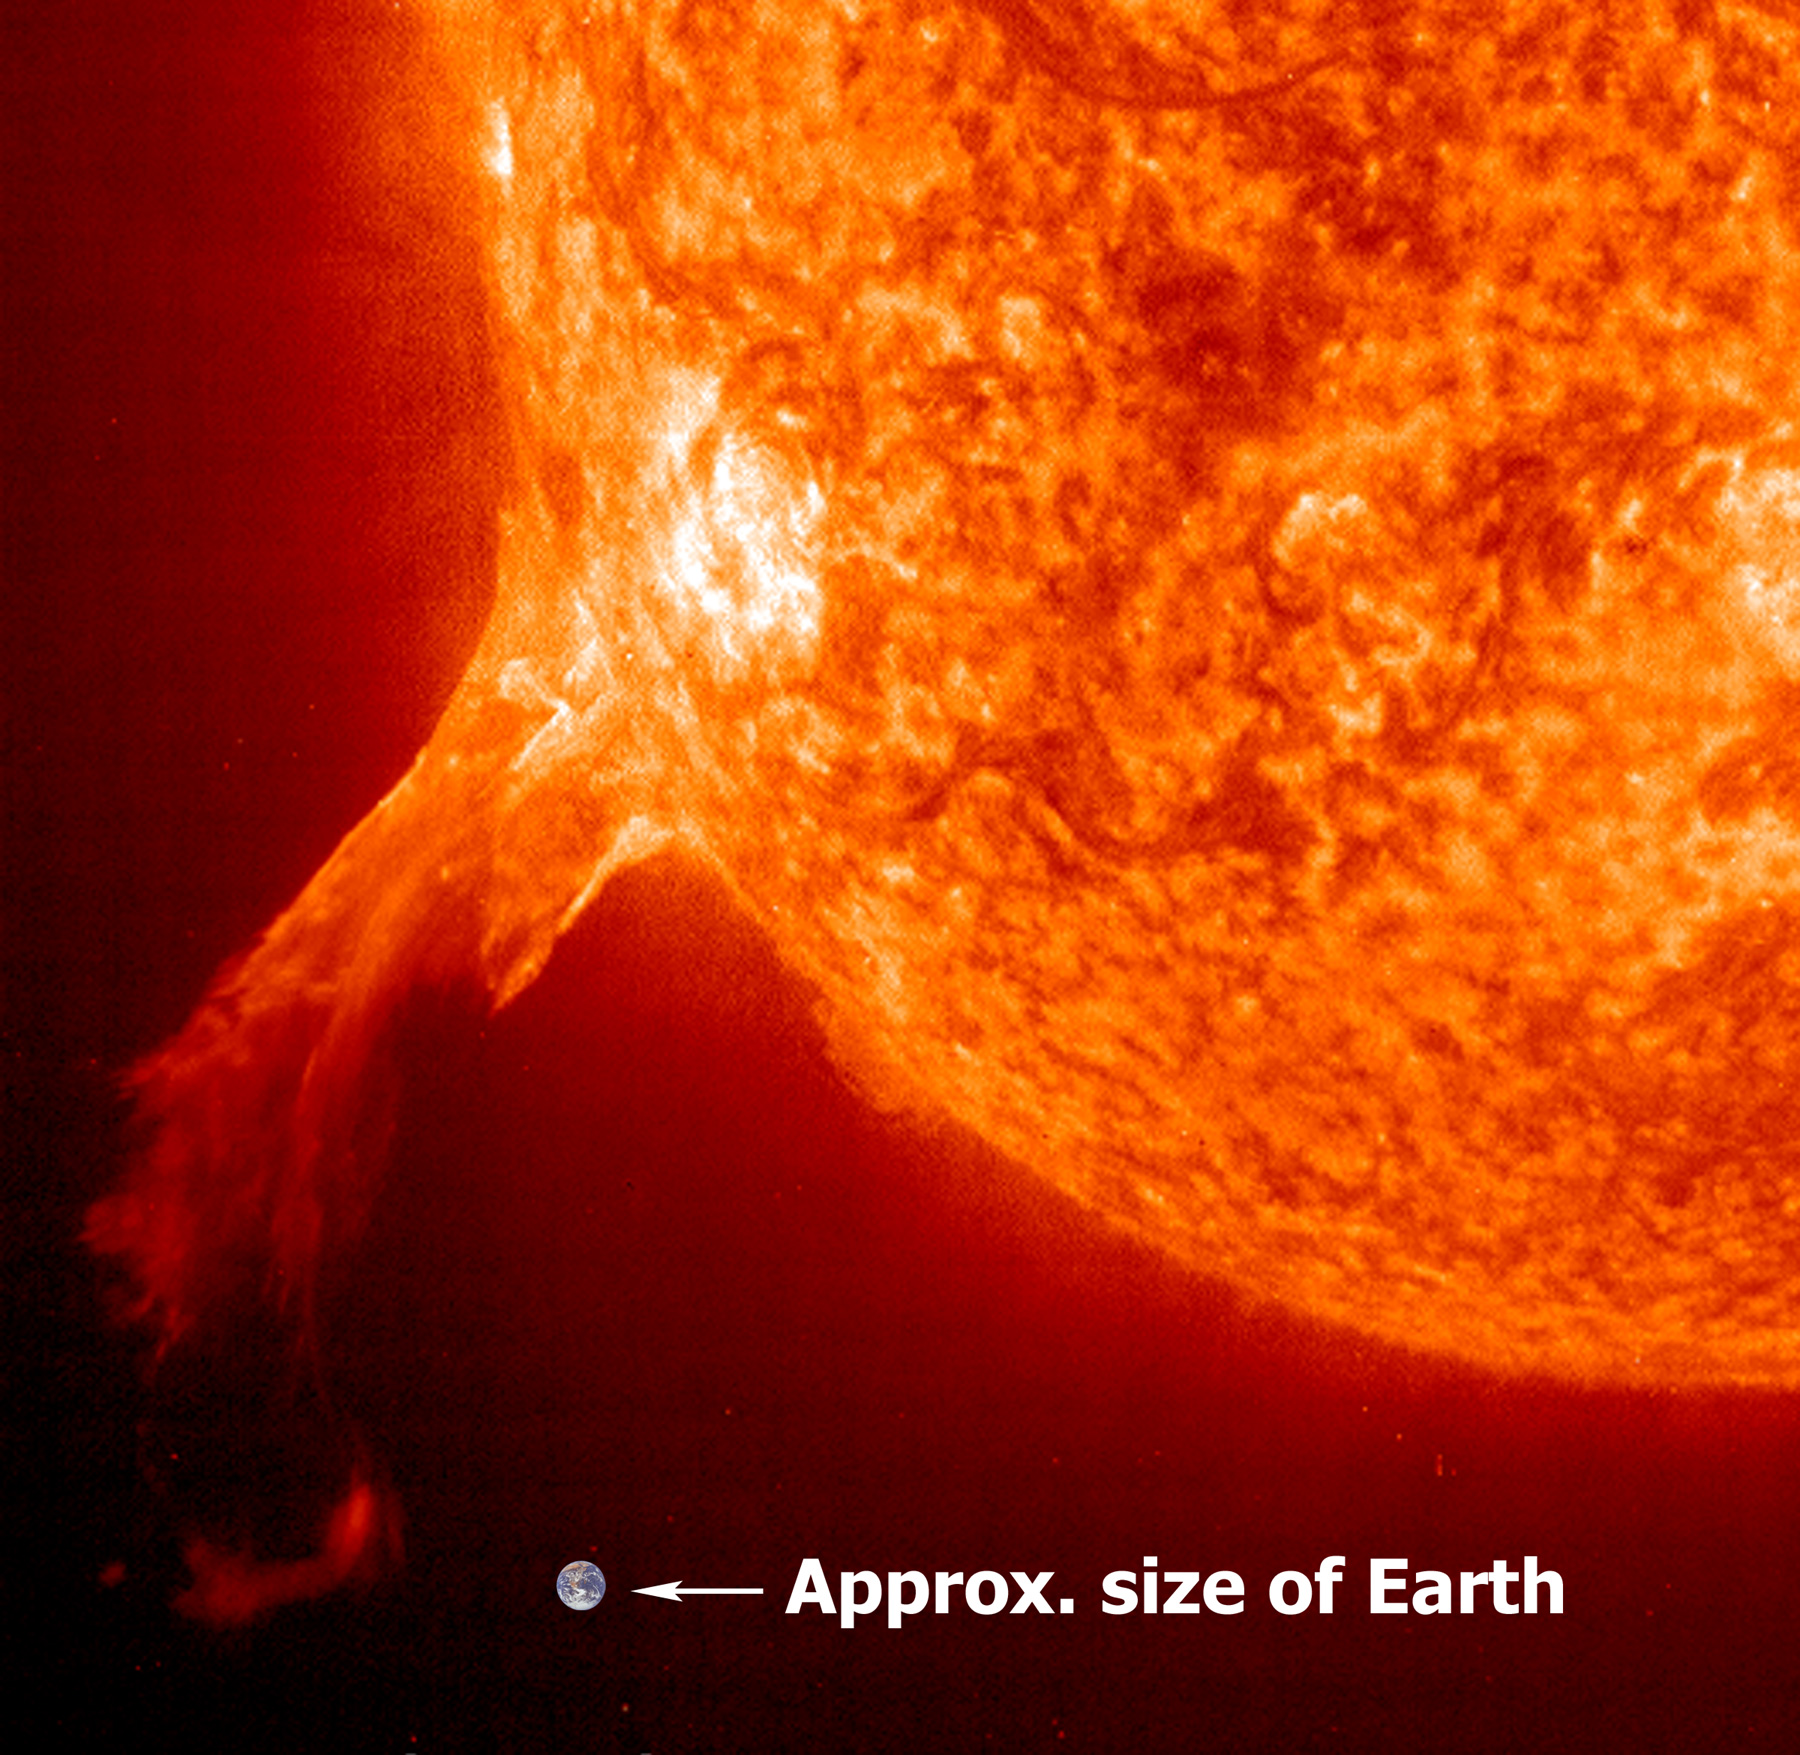 An Erupting Solar Prominence from SOHO